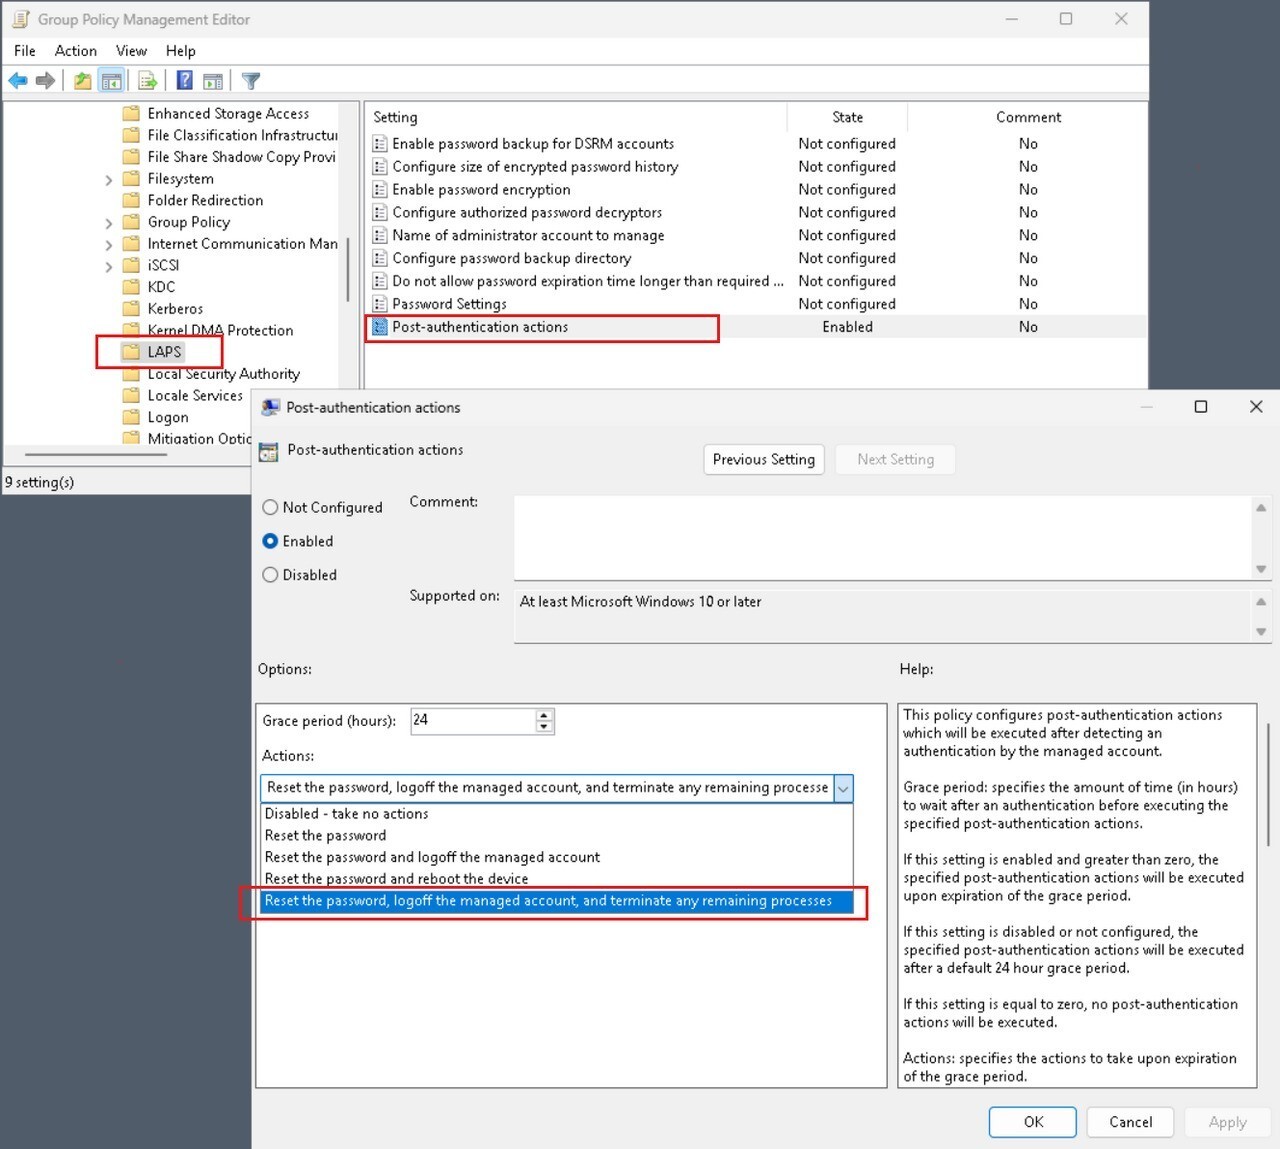 20230712 Insider release PAA specific processes